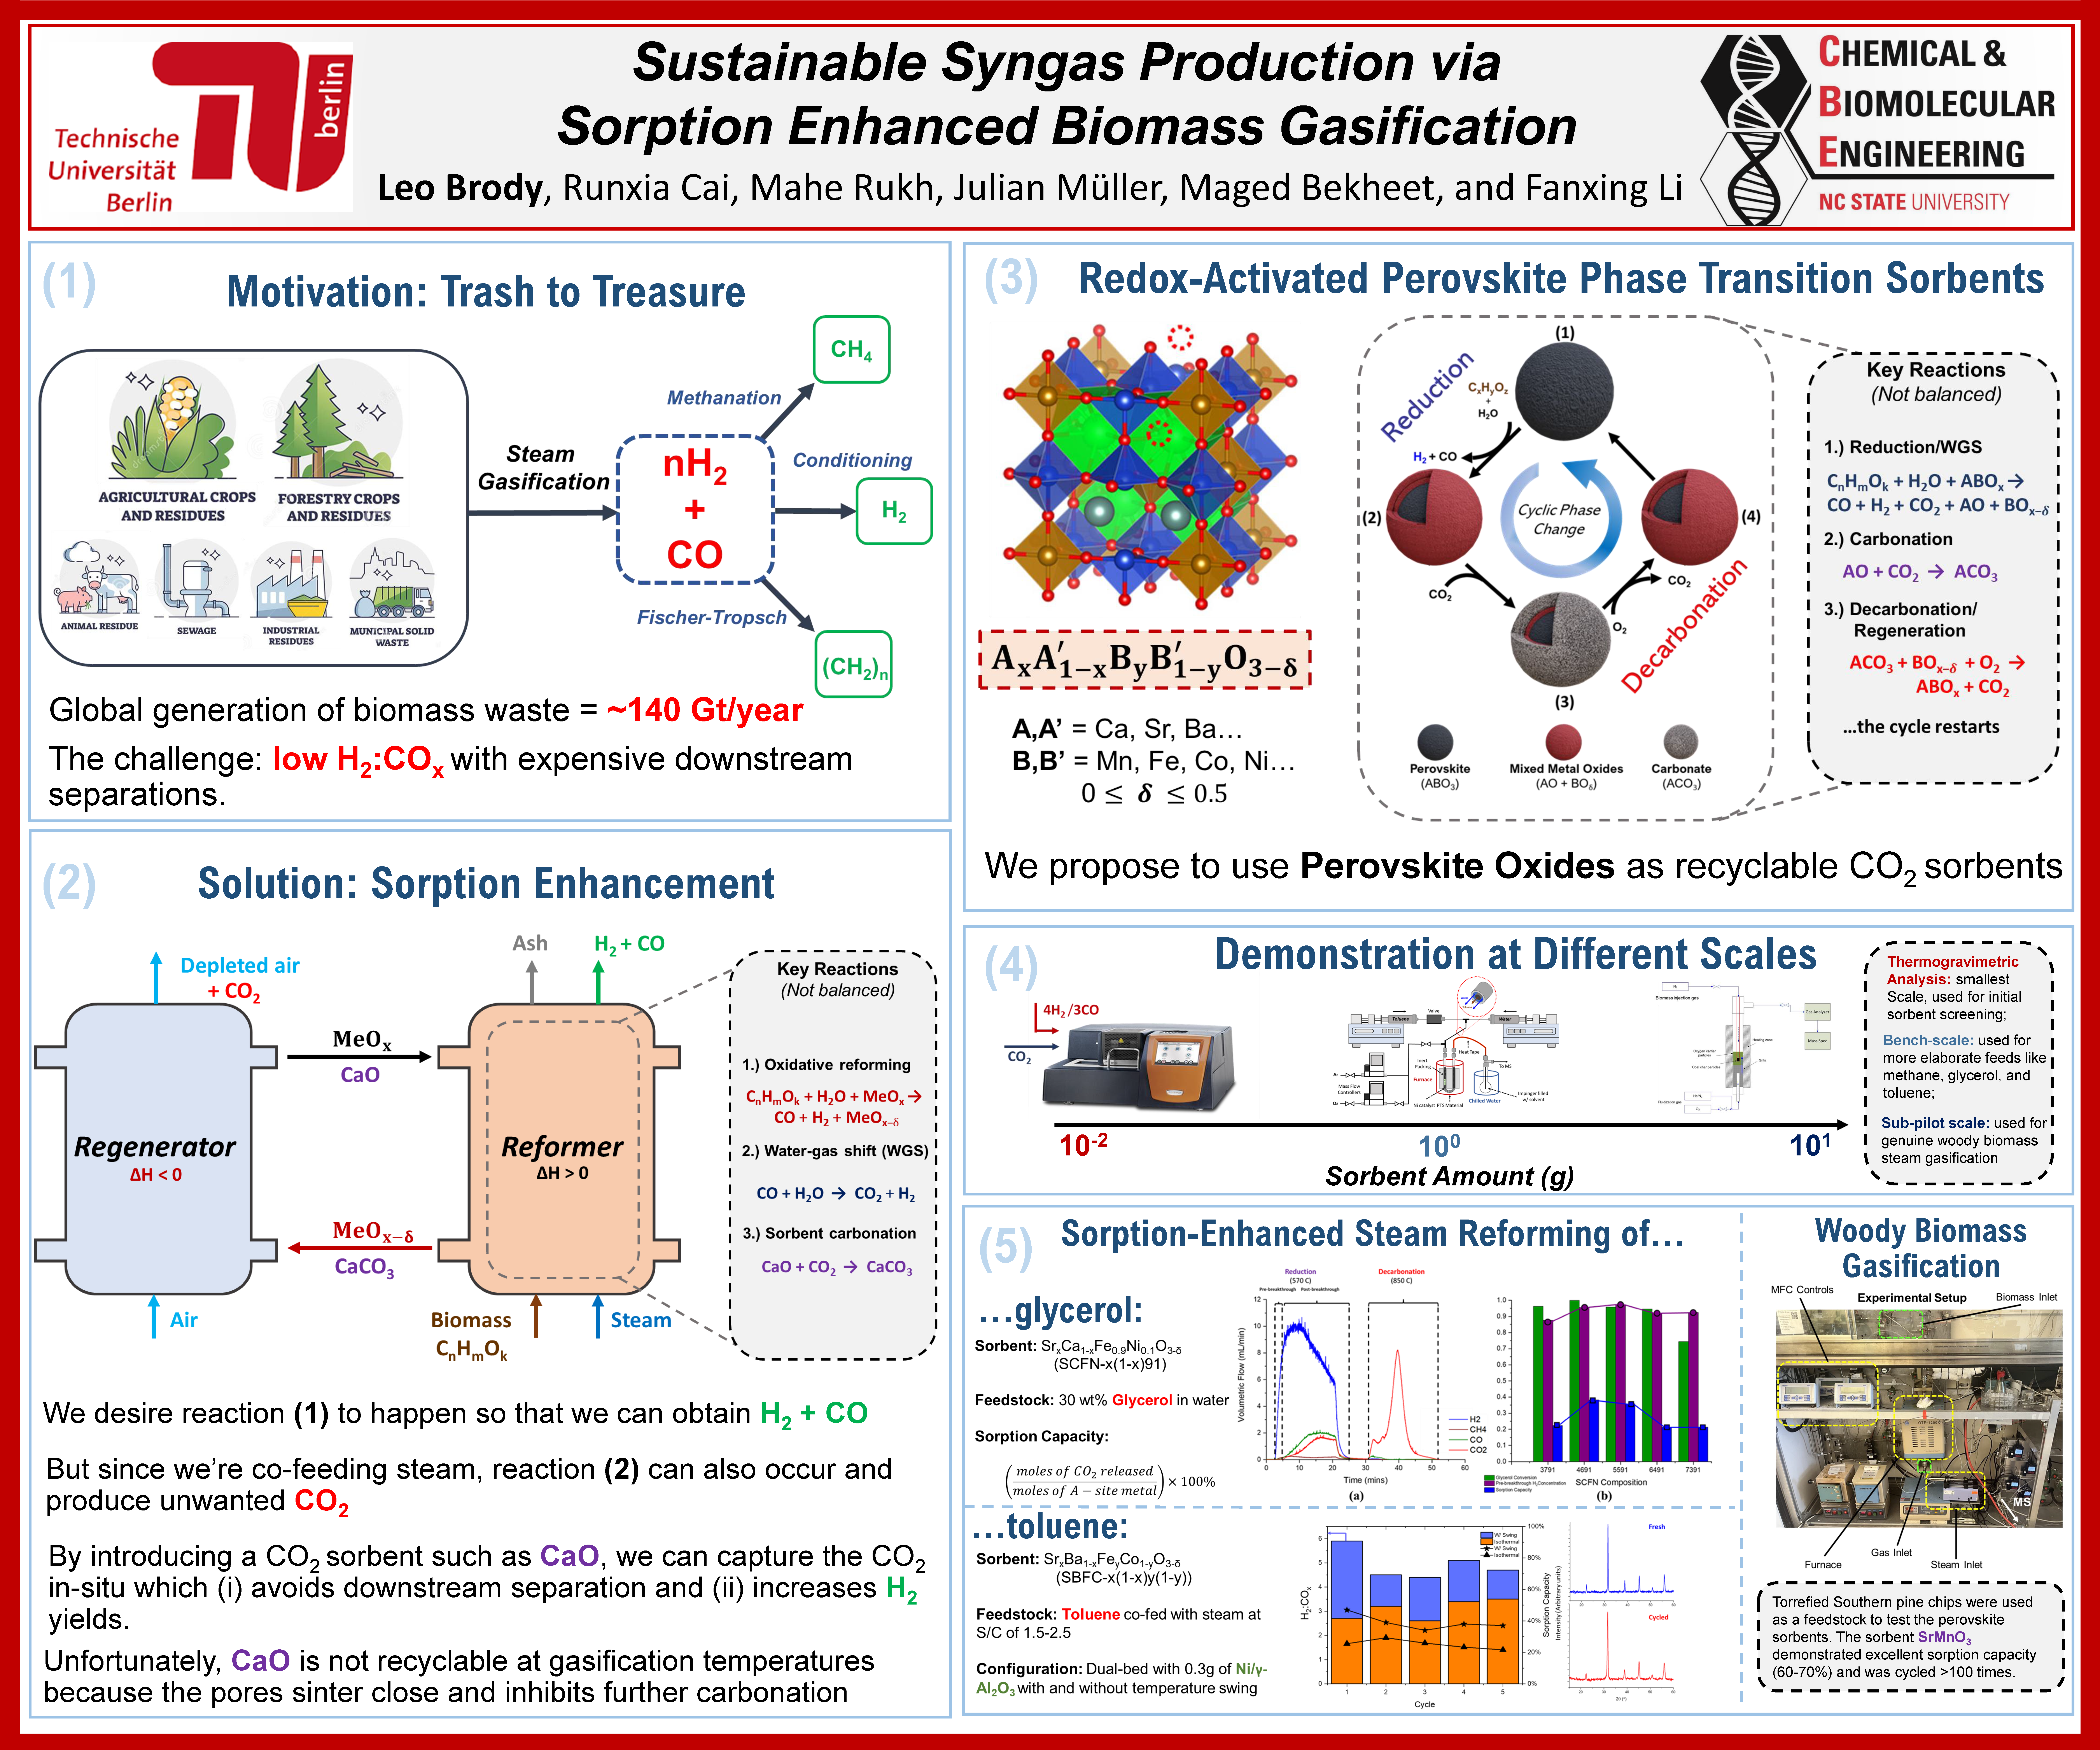 image of Leo Brody's poster, "Sustainable Syngas Production via Sorption Enhanced Biomass Gasification